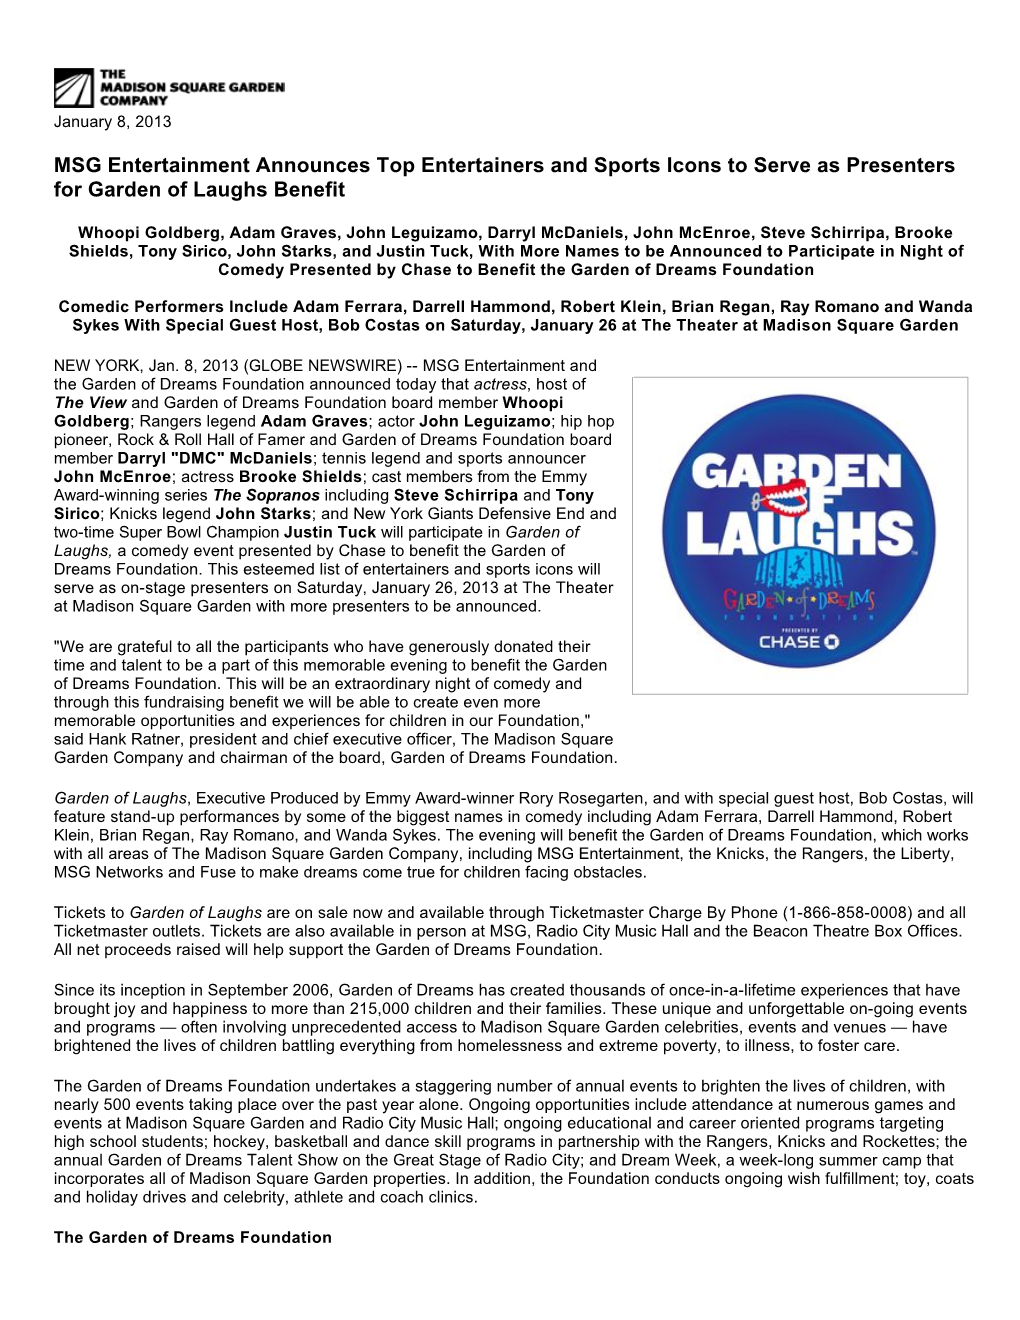 MSG Entertainment Announces Top Entertainers and Sports Icons to Serve As Presenters for Garden of Laughs Benefit